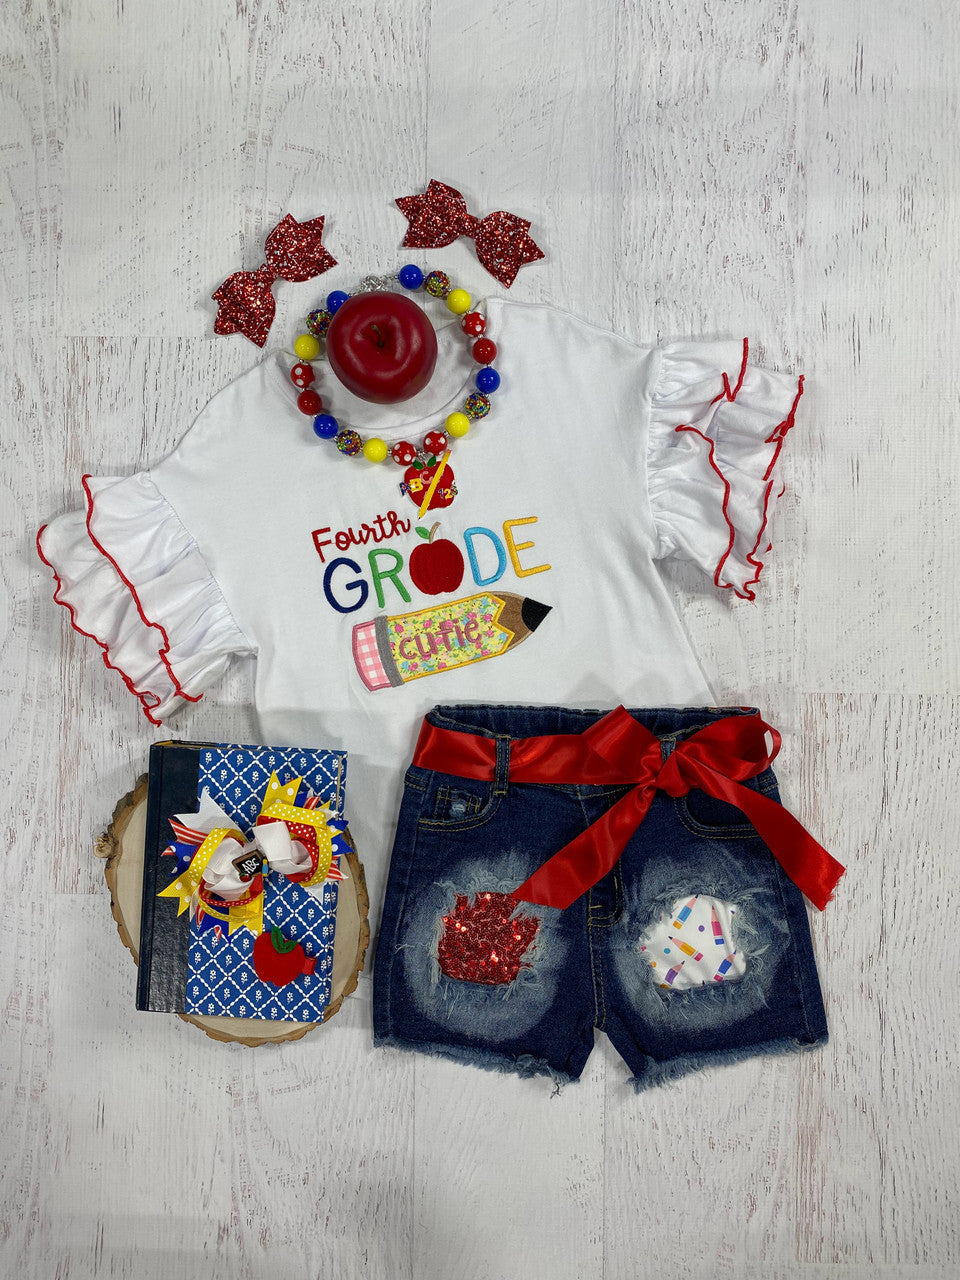 Fourth grade cutie embroidery ruffle sleeve shirt with denim patchwork shorts. 